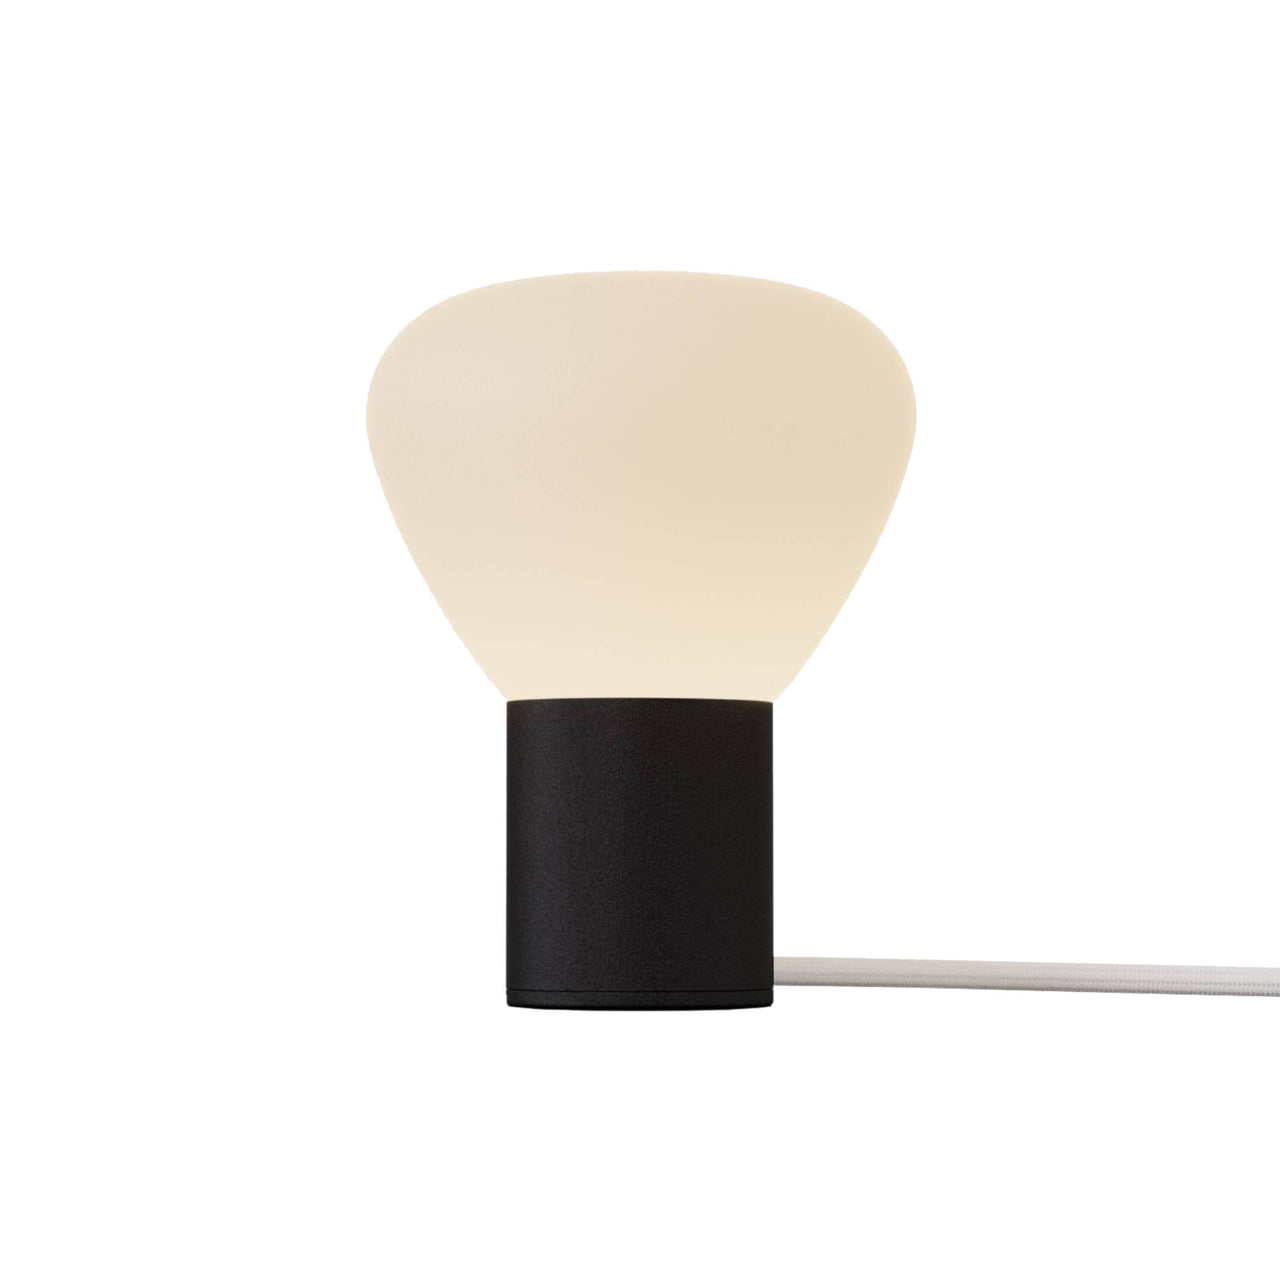 Parc 01 Table Lamp: Handswitch +  Black + White